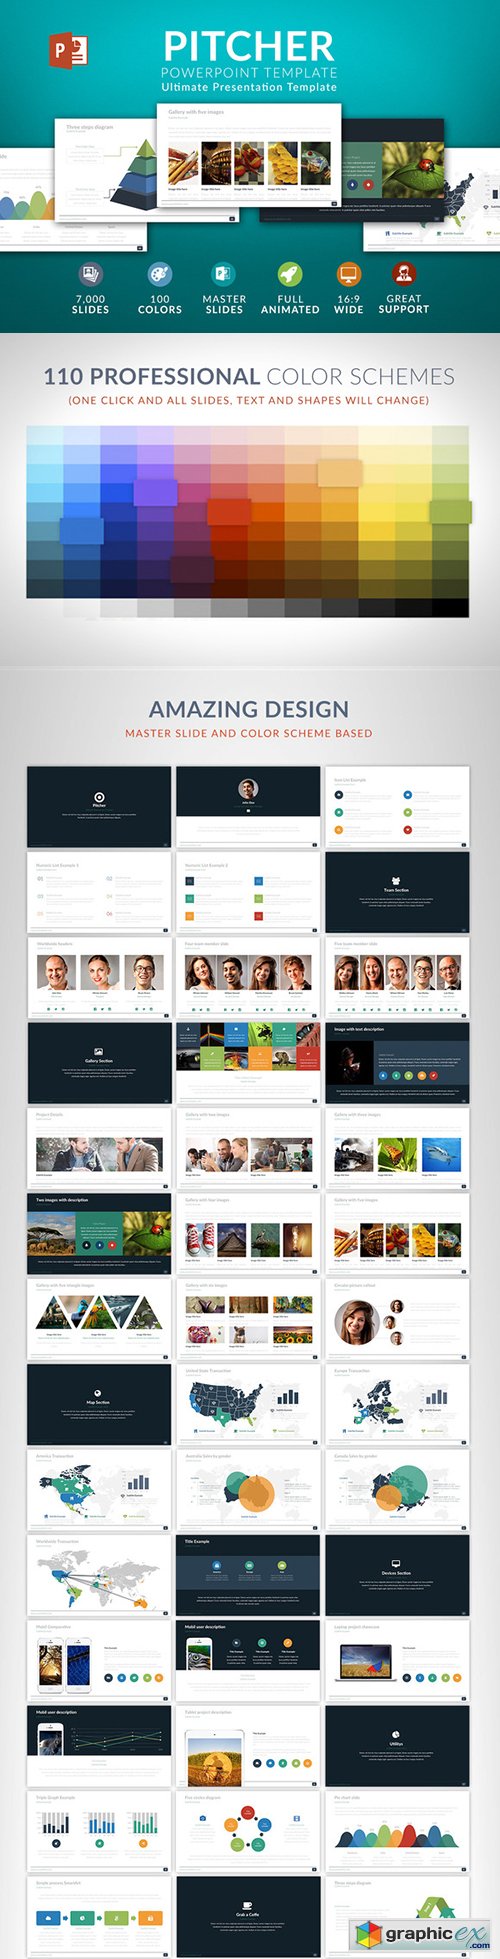 Pitcher Powerpoint template